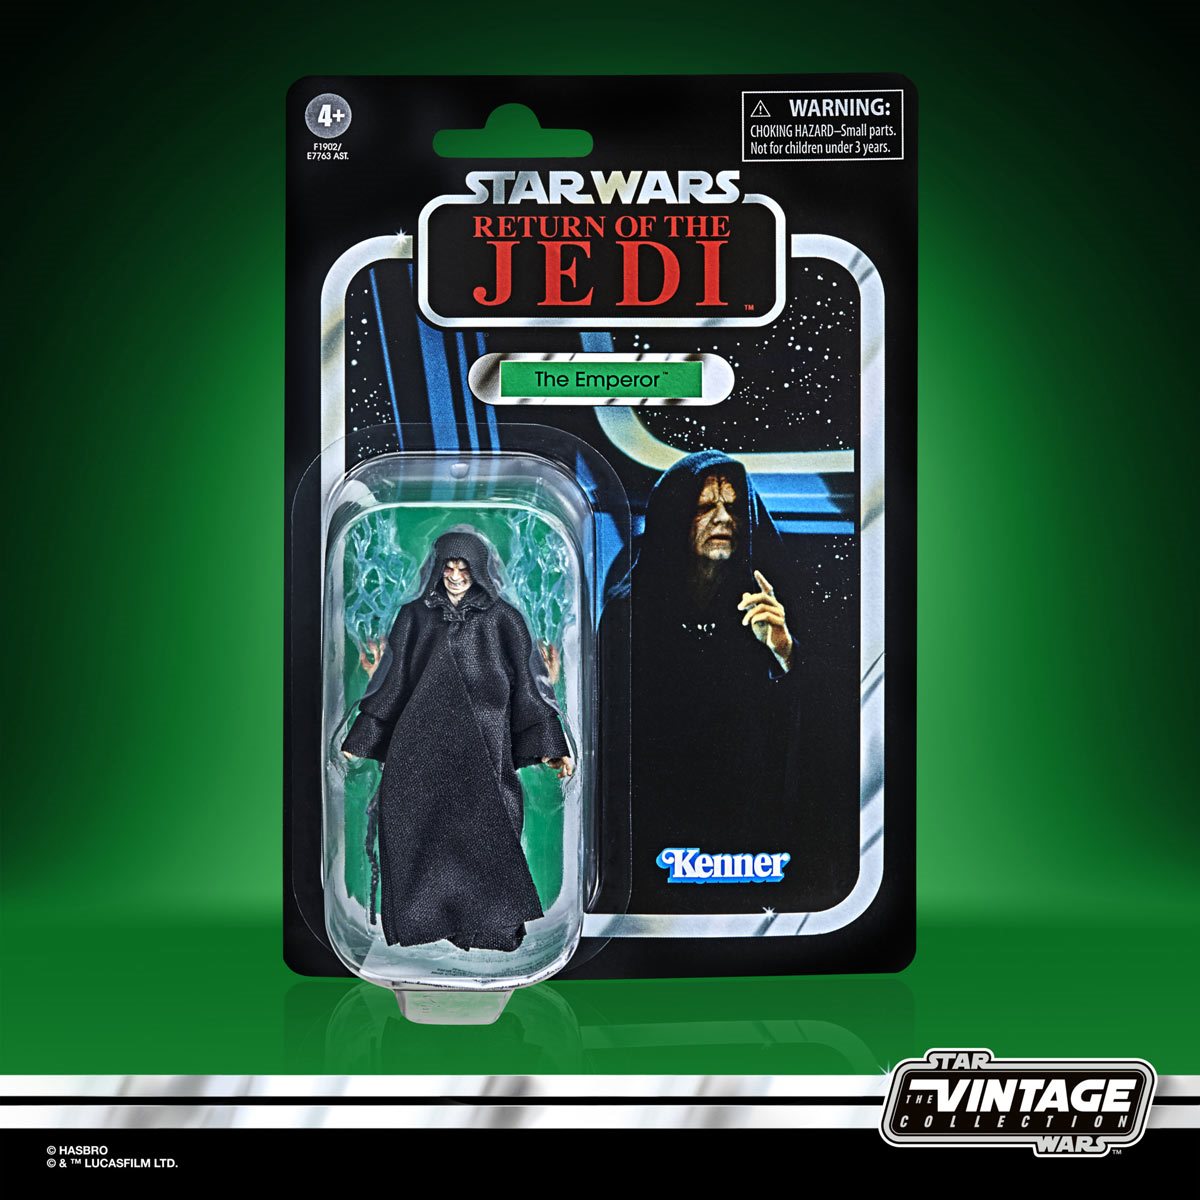 3.75-Inch-Scale Return of The Jedi Action Figure Star Wars The Vintage Collection The Emperor Toy Toys for Kids Ages 4 and Up,F1902 